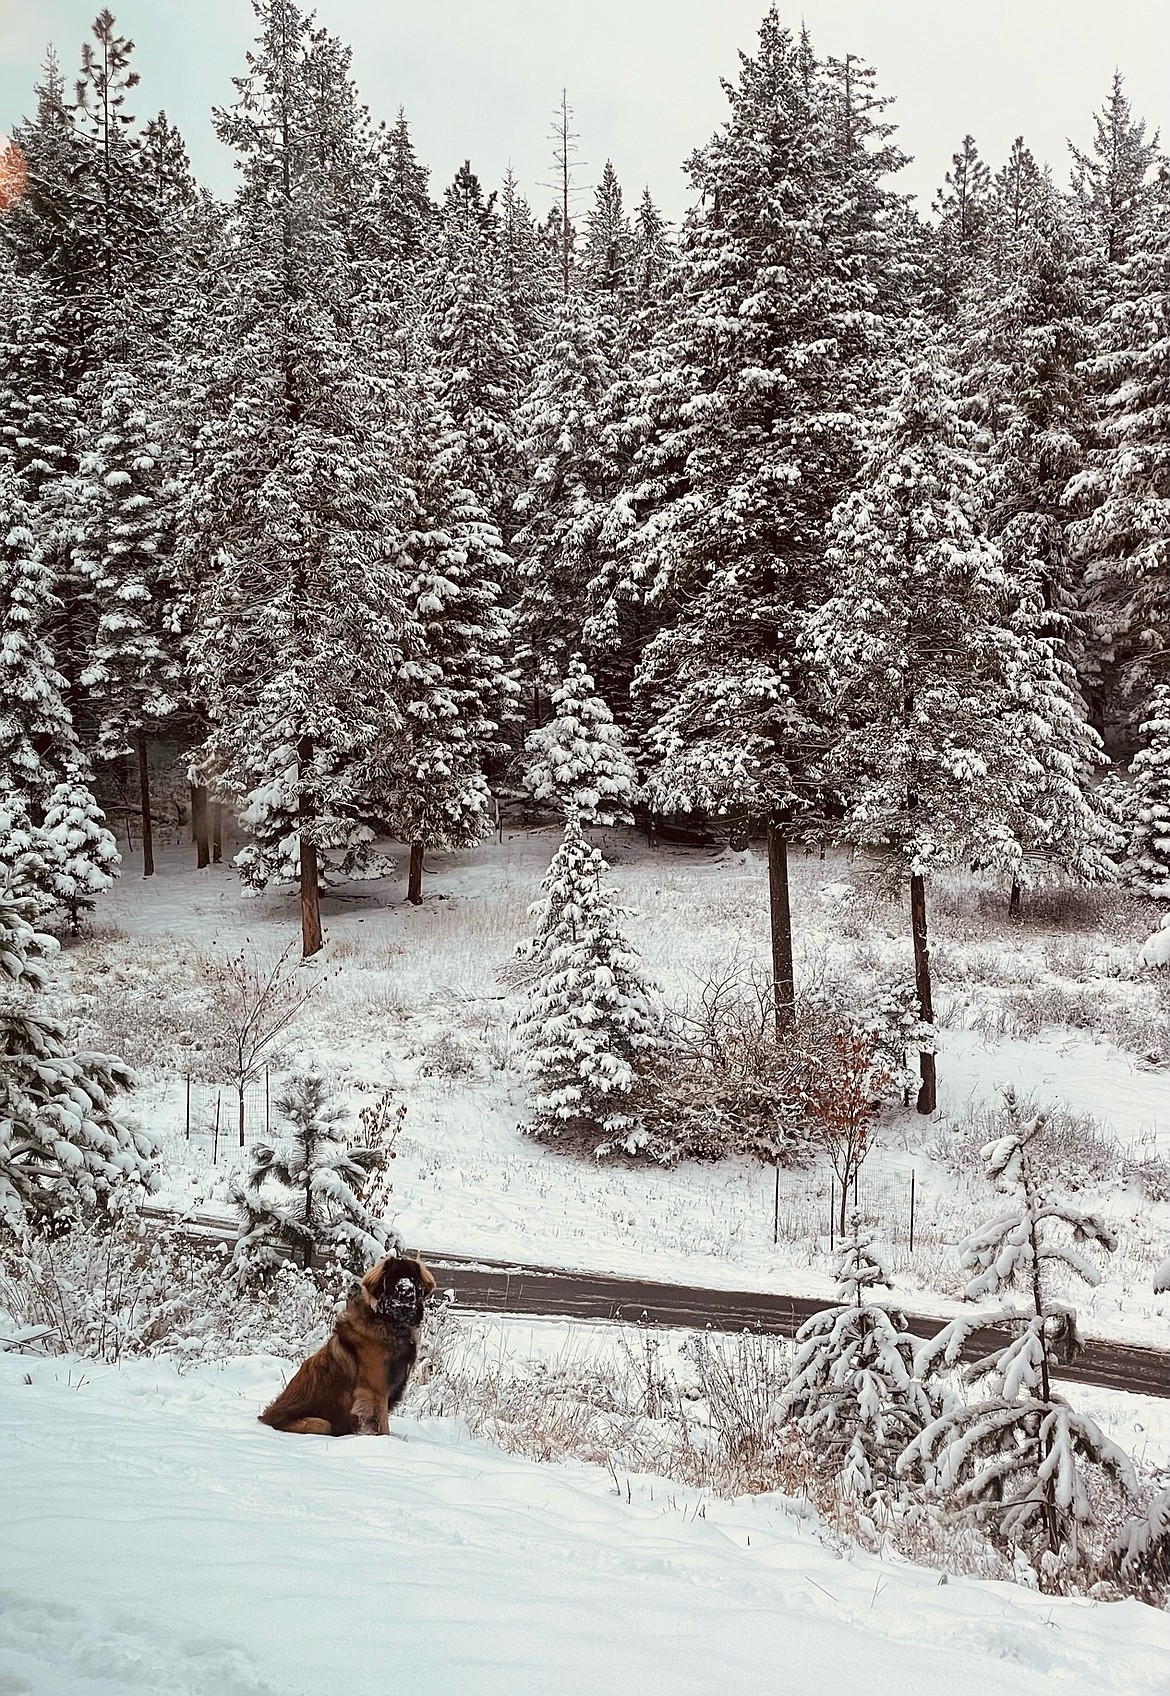 "Waylon, our 8-month-old Leonberger, enjoying the snow!"